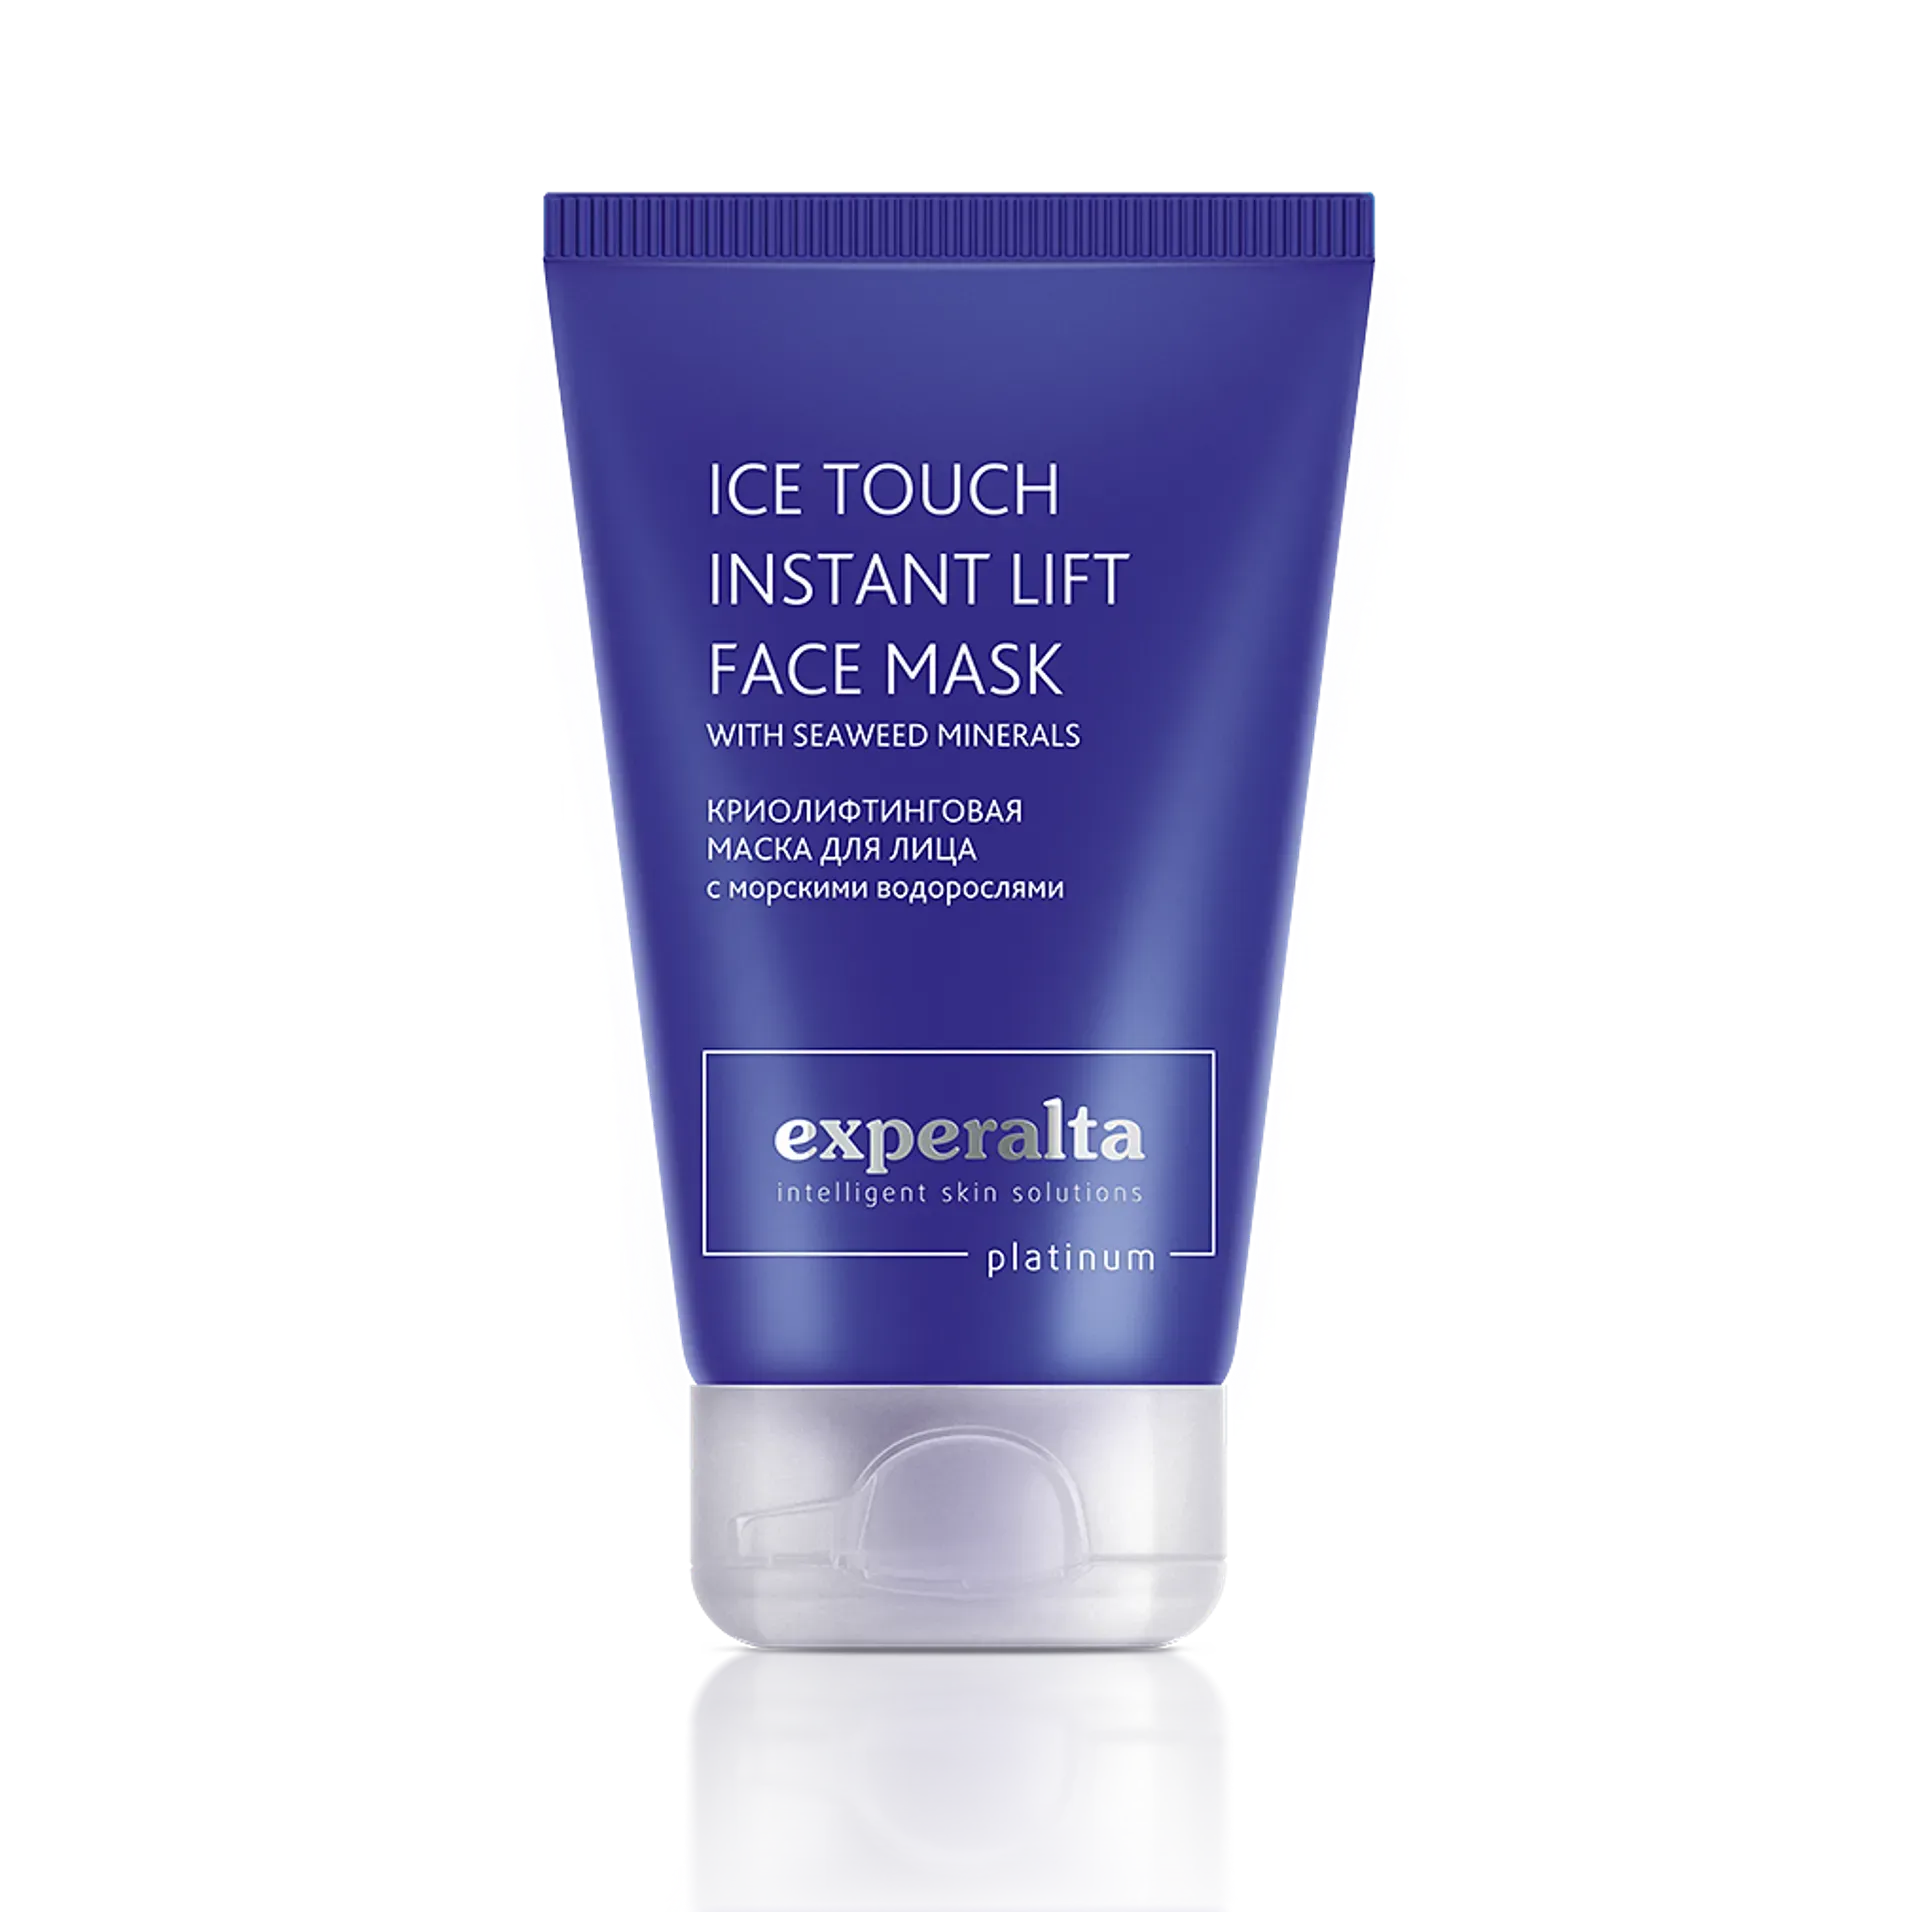 Ice Touch Instant Lift Mask